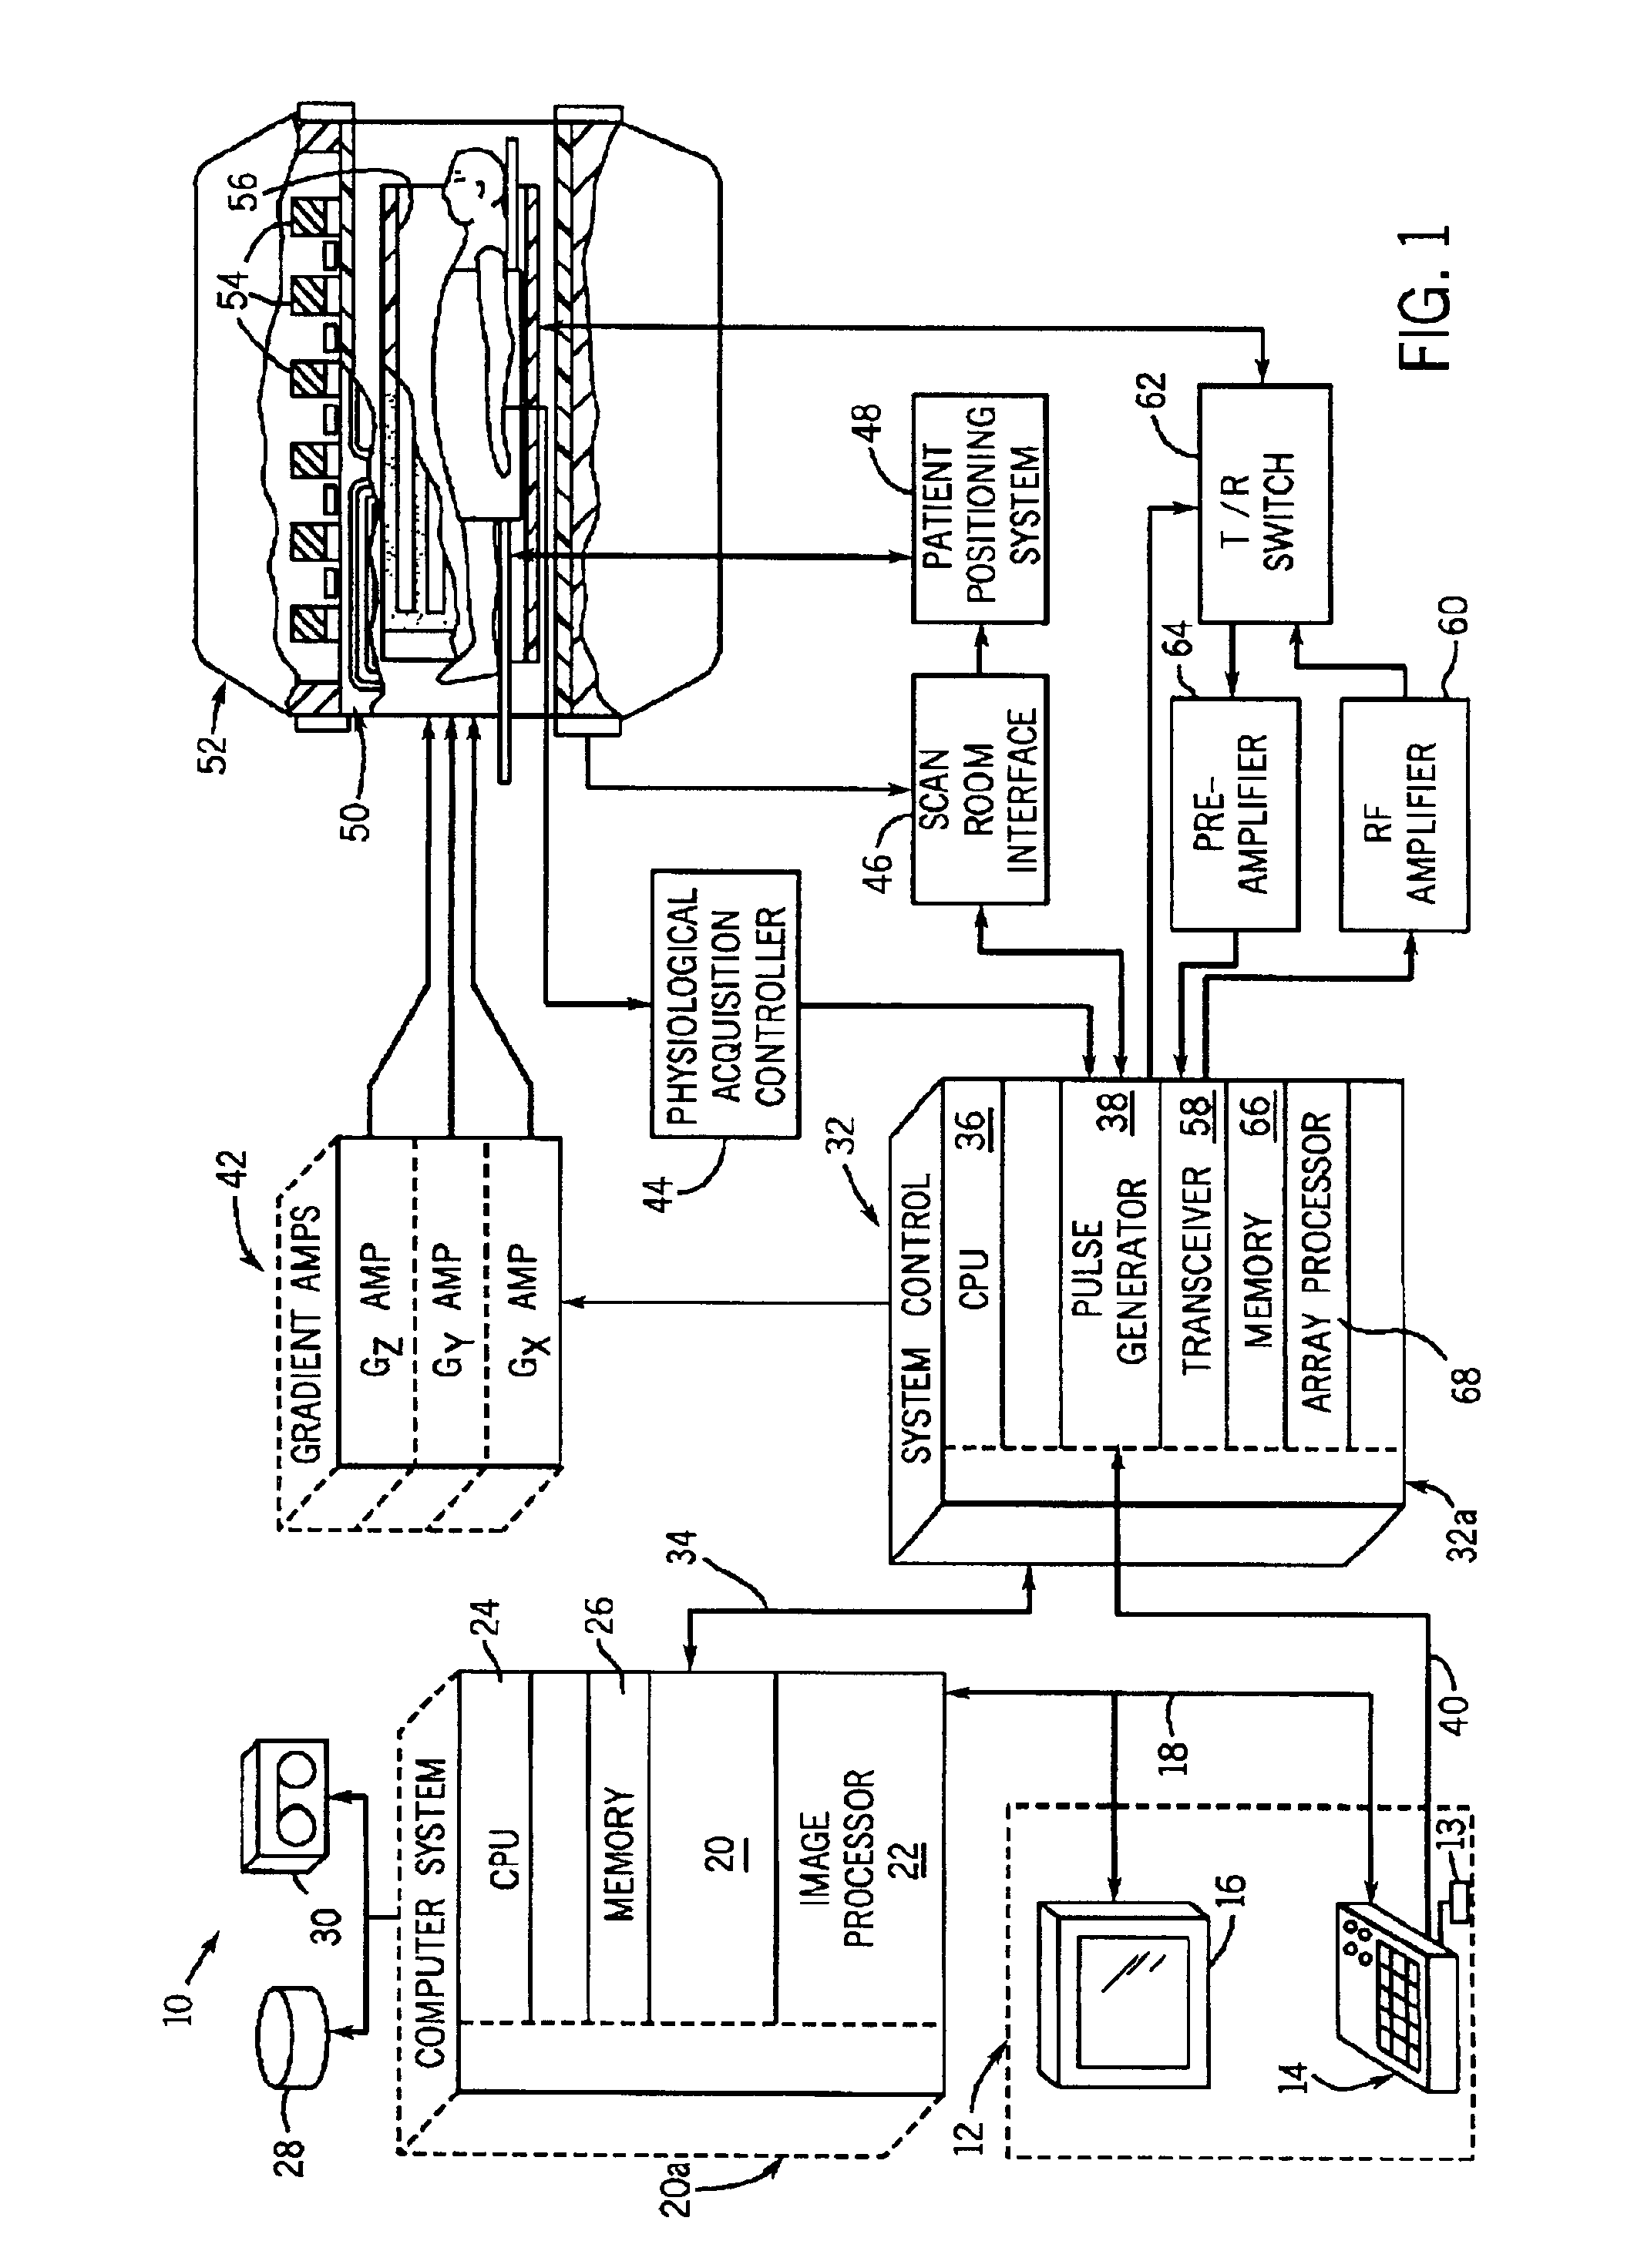 Method and system to regulate cooling of a medical imaging device